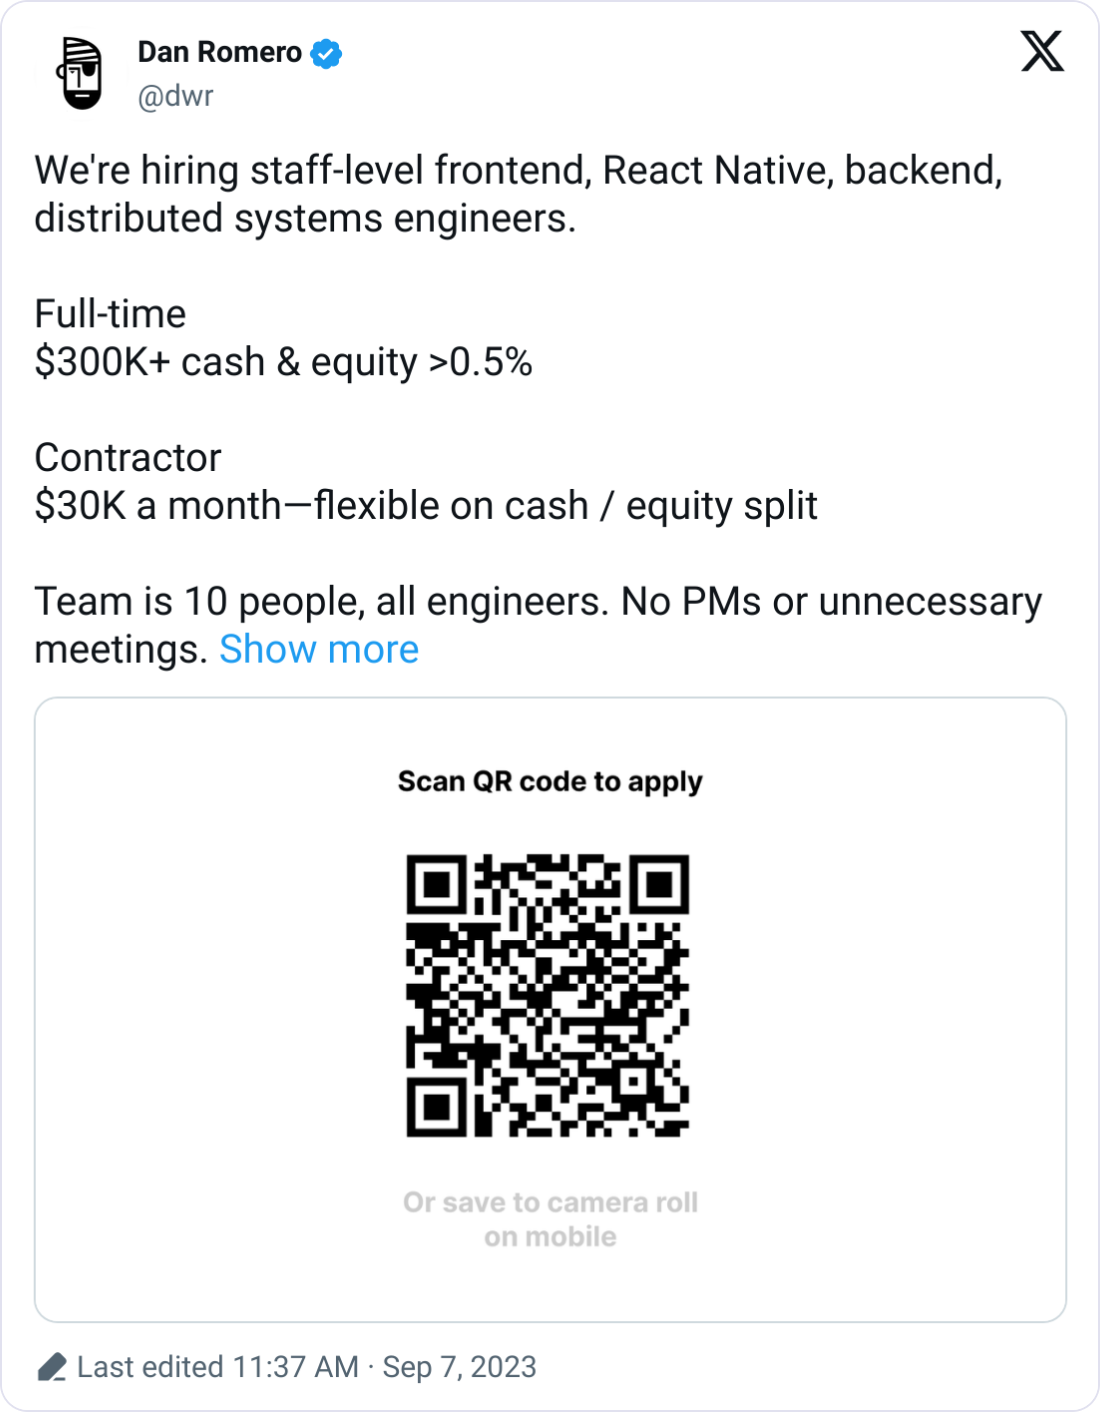 Dan Romero @dwr We're hiring staff-level frontend, React Native, backend, distributed systems engineers.  Full-time $300K+ cash & equity >0.5%  Contractor $30K a month—flexible on cash / equity split  Team is 10 people, all engineers. No PMs or unnecessary meetings.